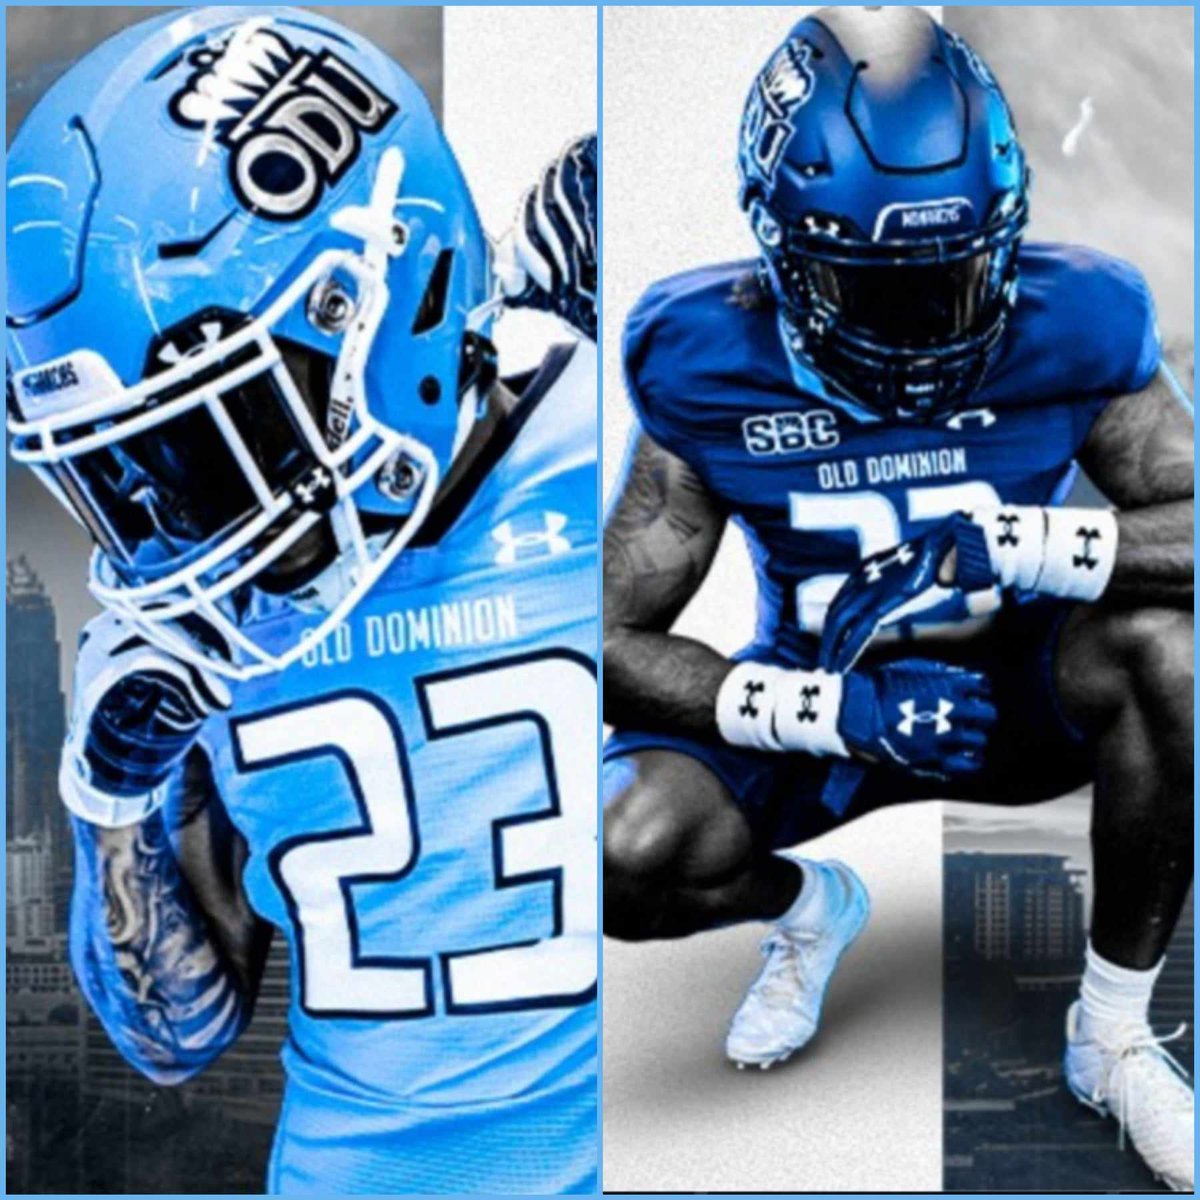 Blessed and excited to be attending @ODUFootball 🏈spring practice tomorrow‼️ @RickyRahne @Coach__Seiler @Coach_TLucas @KylePollockFB @COACH217ROLAND @JMThompson12 @LUmm55 @CamdenRecruits @RocCarmichael @TheeCoachO